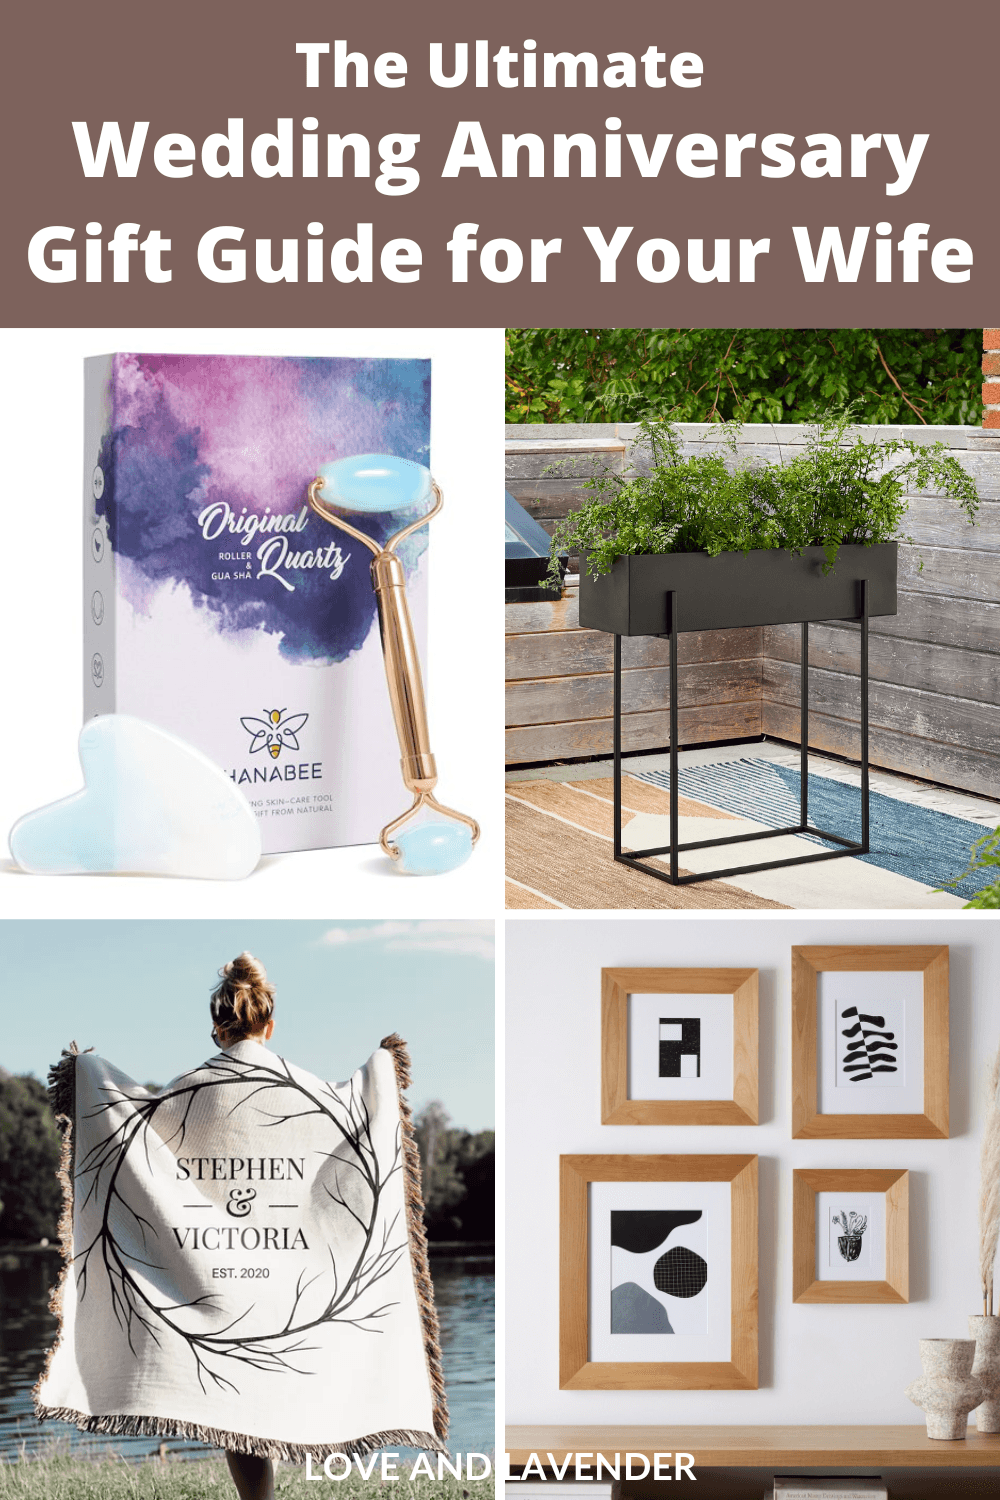 30 Best Wedding Anniversary Gift Ideas for Your Wife - Make Her Day Special!